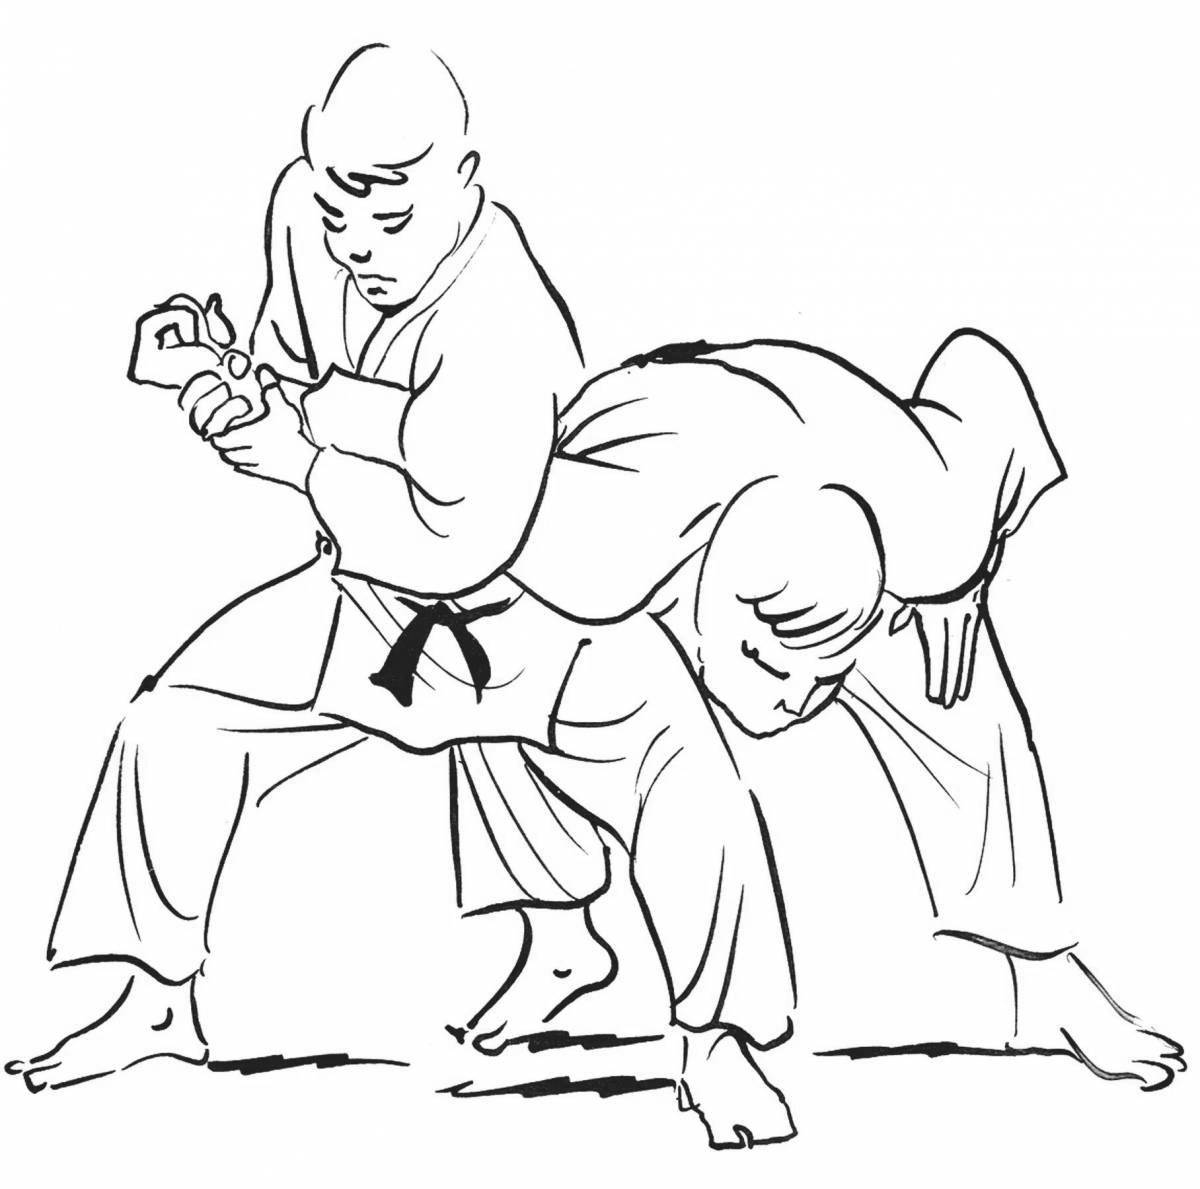 Bright aikido coloring page